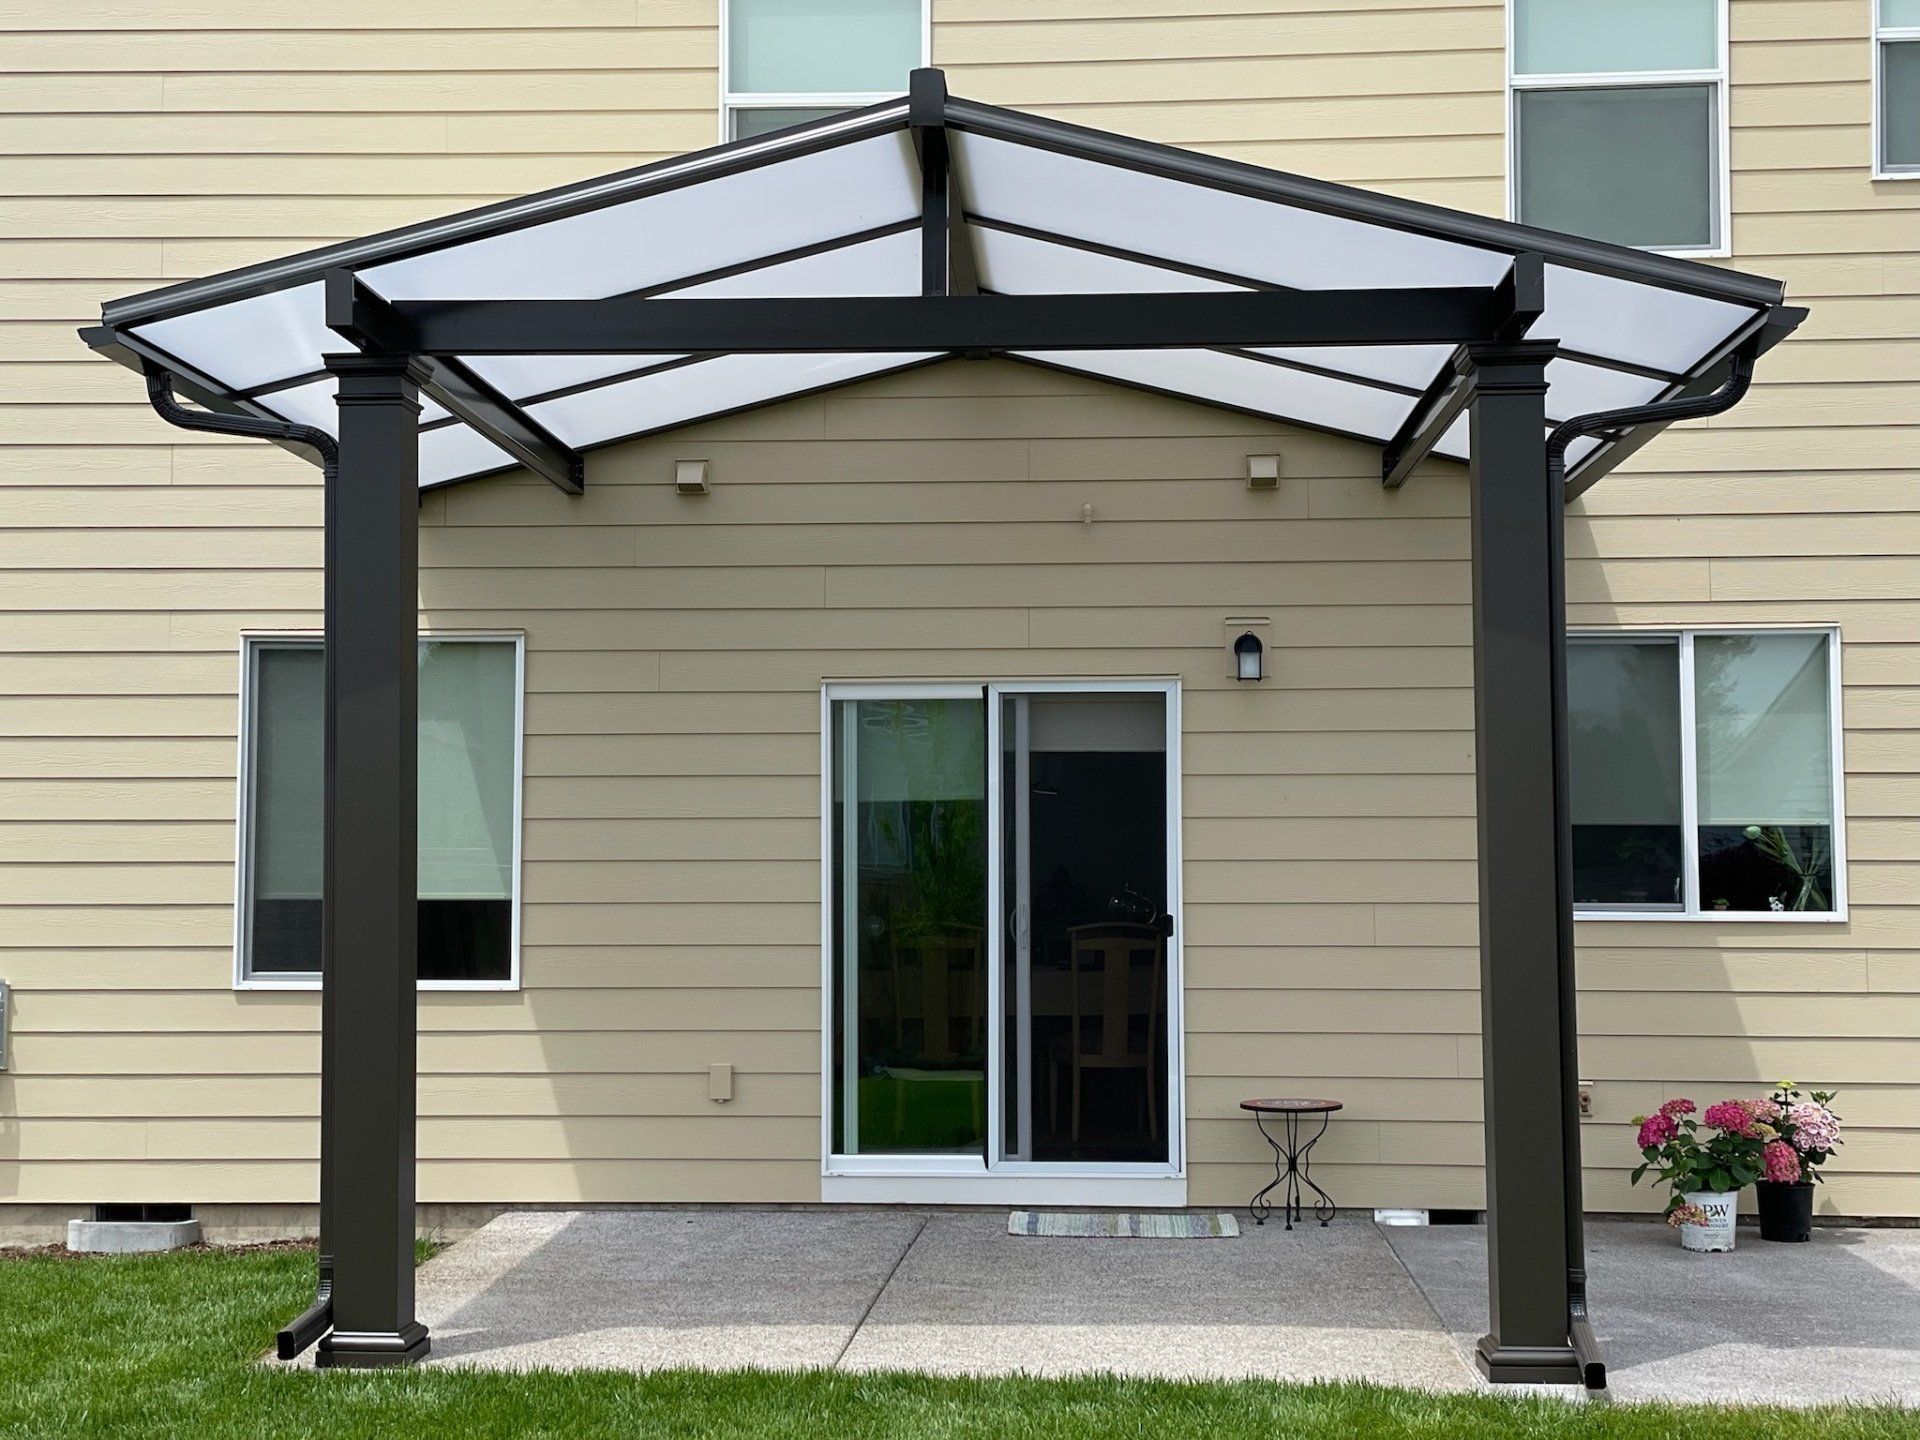 Patio Cover Contractor in Lake Oswego - Crown Patio Covers Process